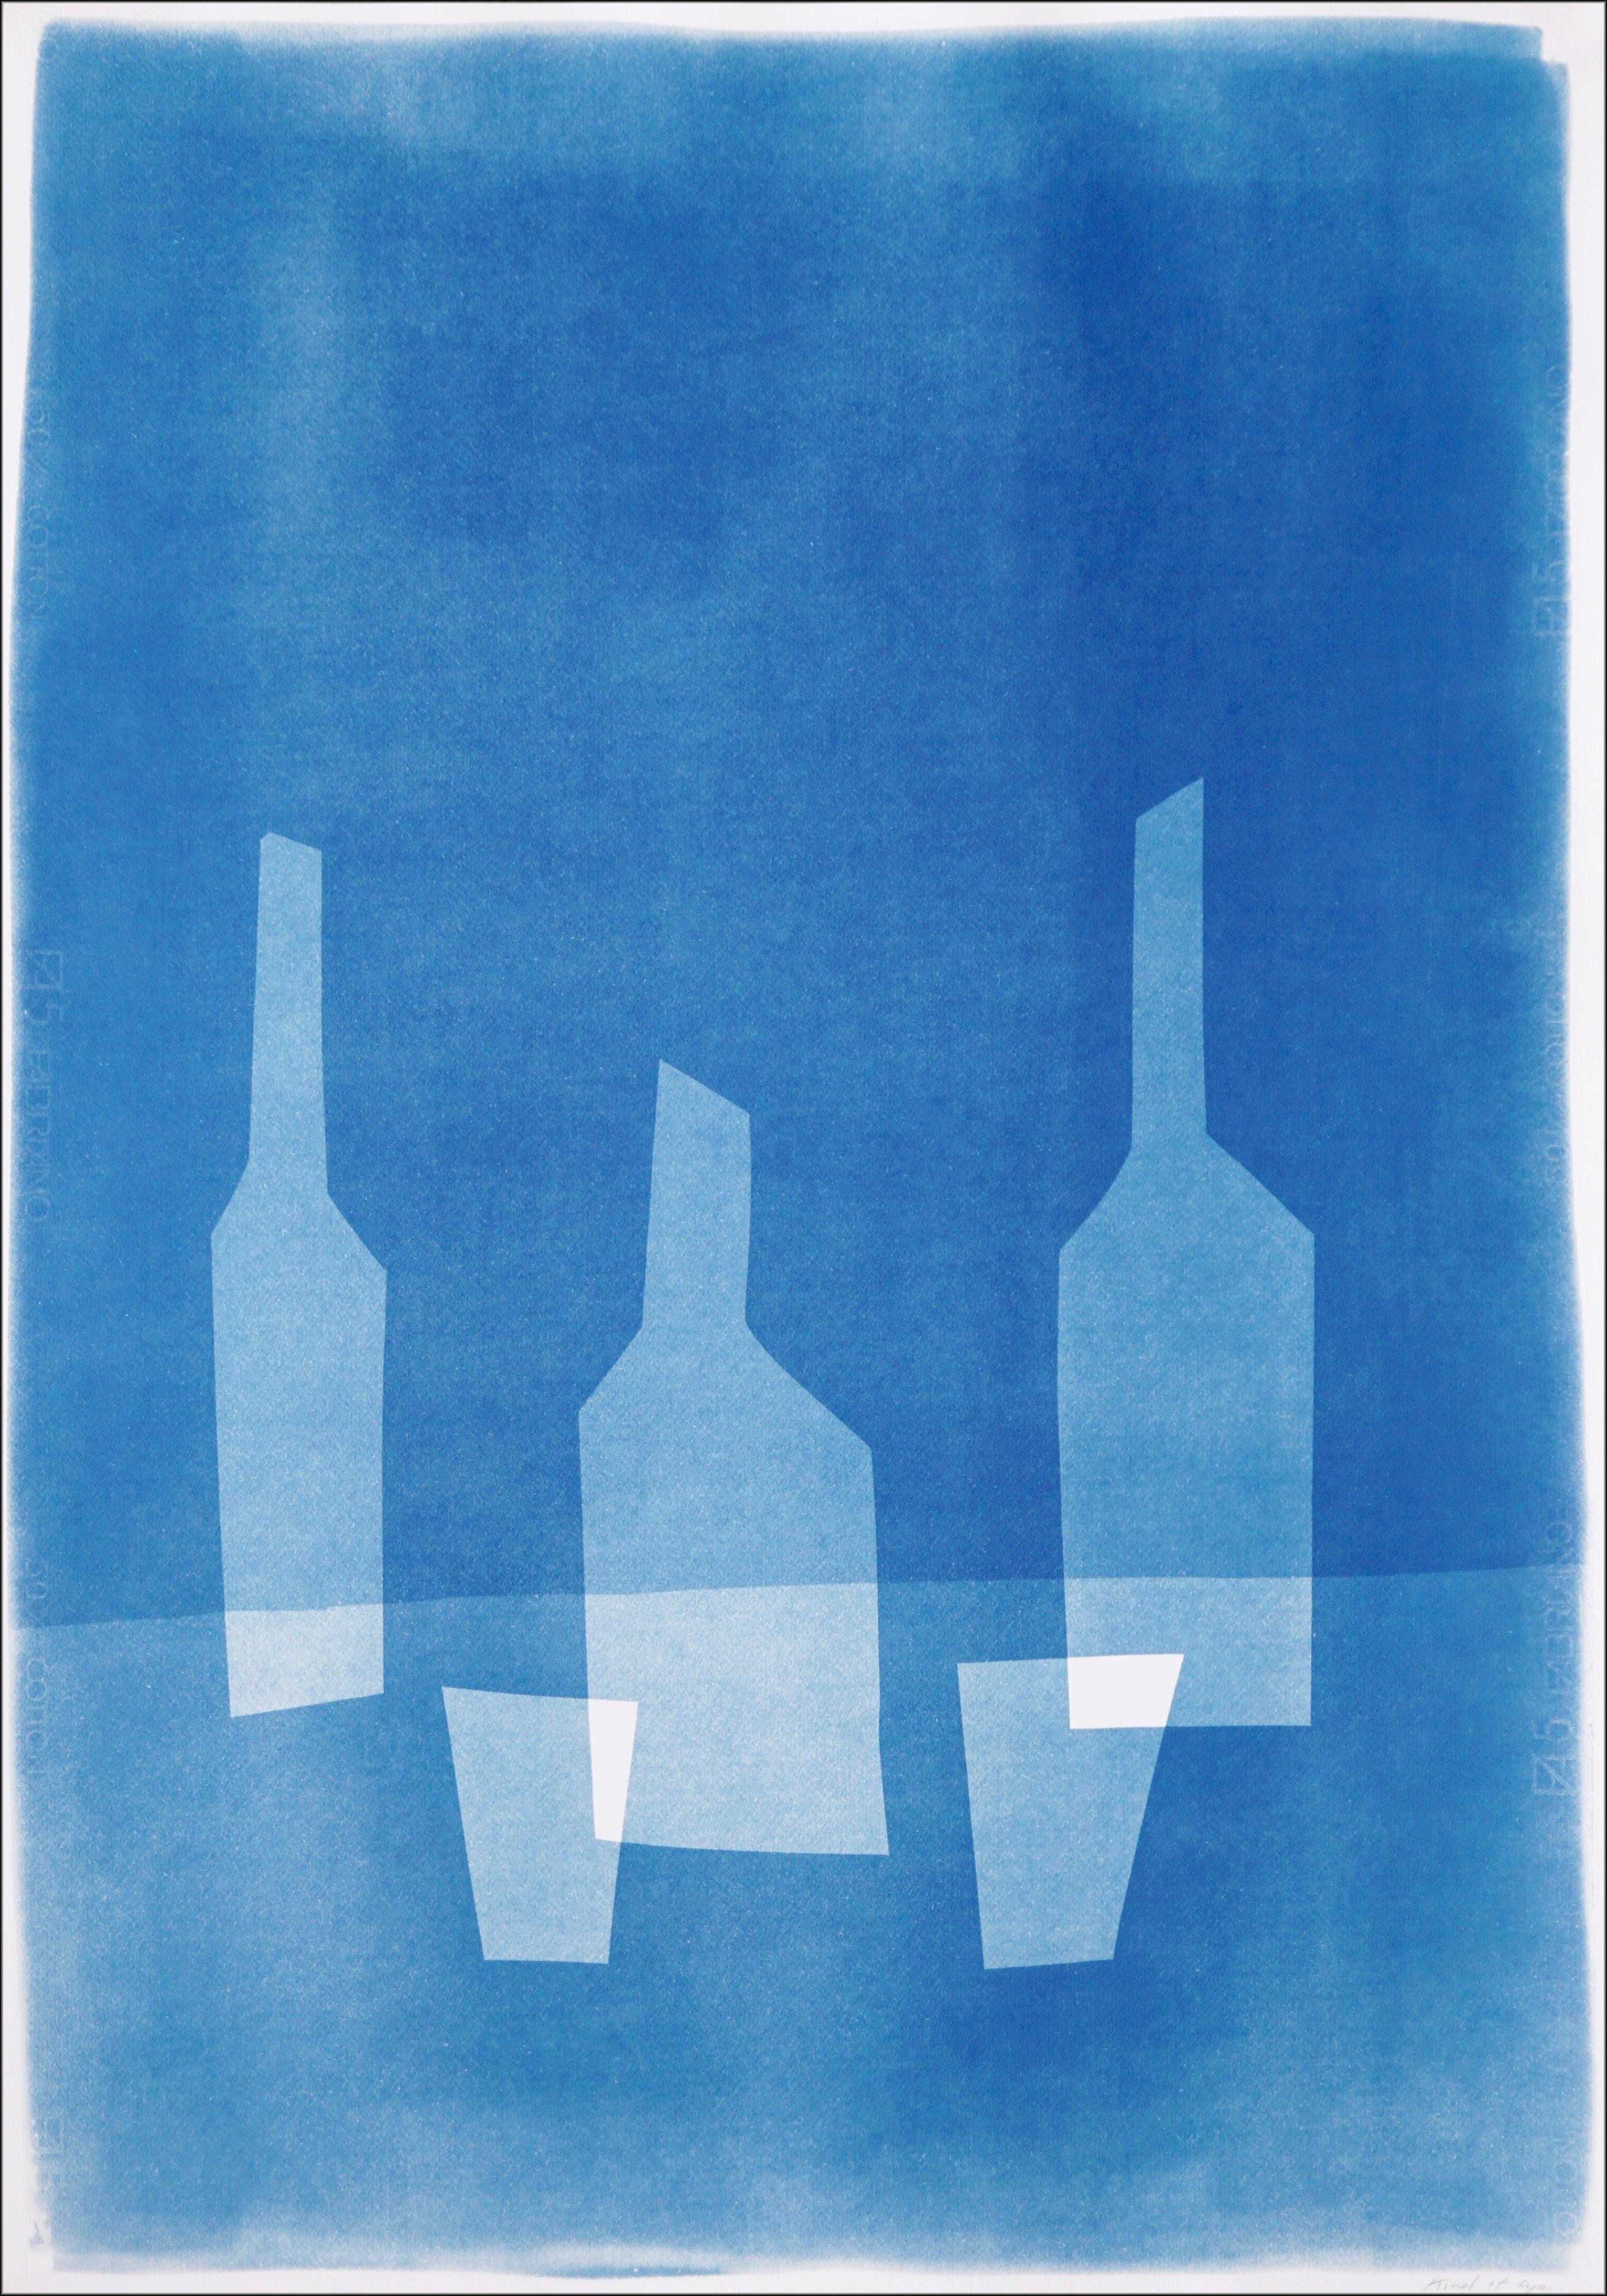 Kind of Cyan Still-Life Print - Tree Bottles for Two People, Blue Tones, Modern Monotype, Vertical Still Life